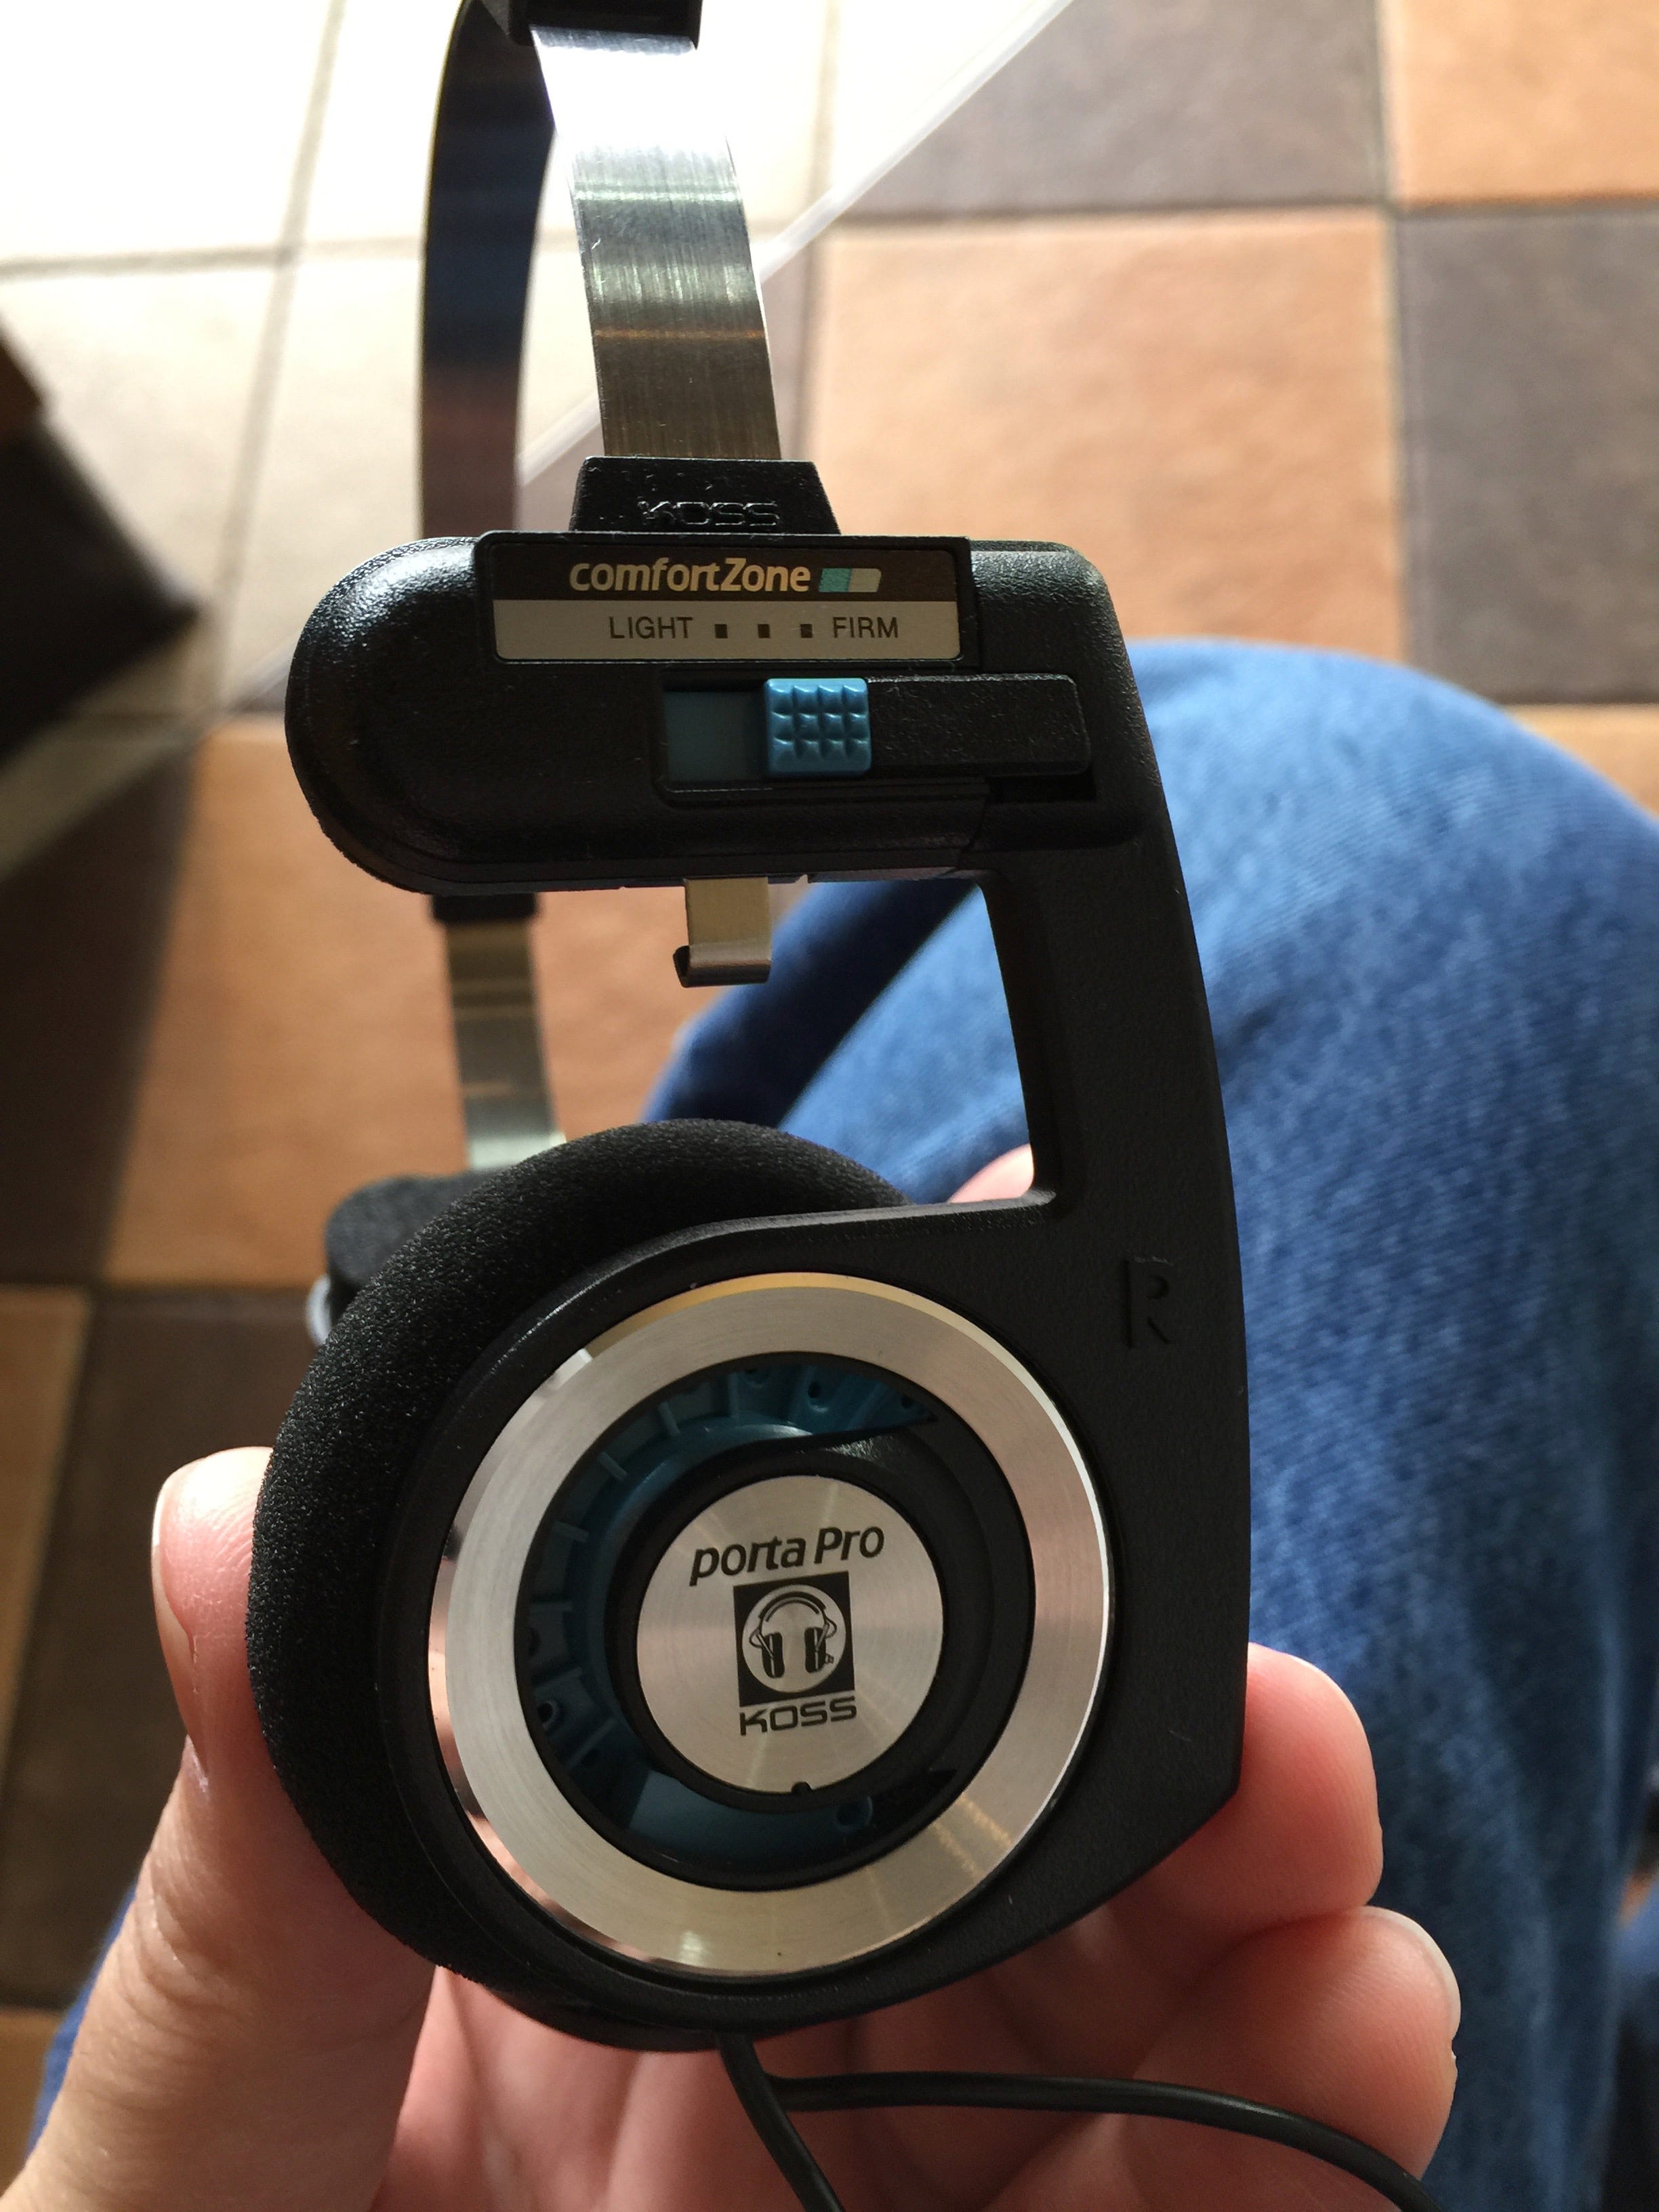 Koss Porta Pro Headphone Review Wow The Best Value On The Market Period By Alex Rowe Medium